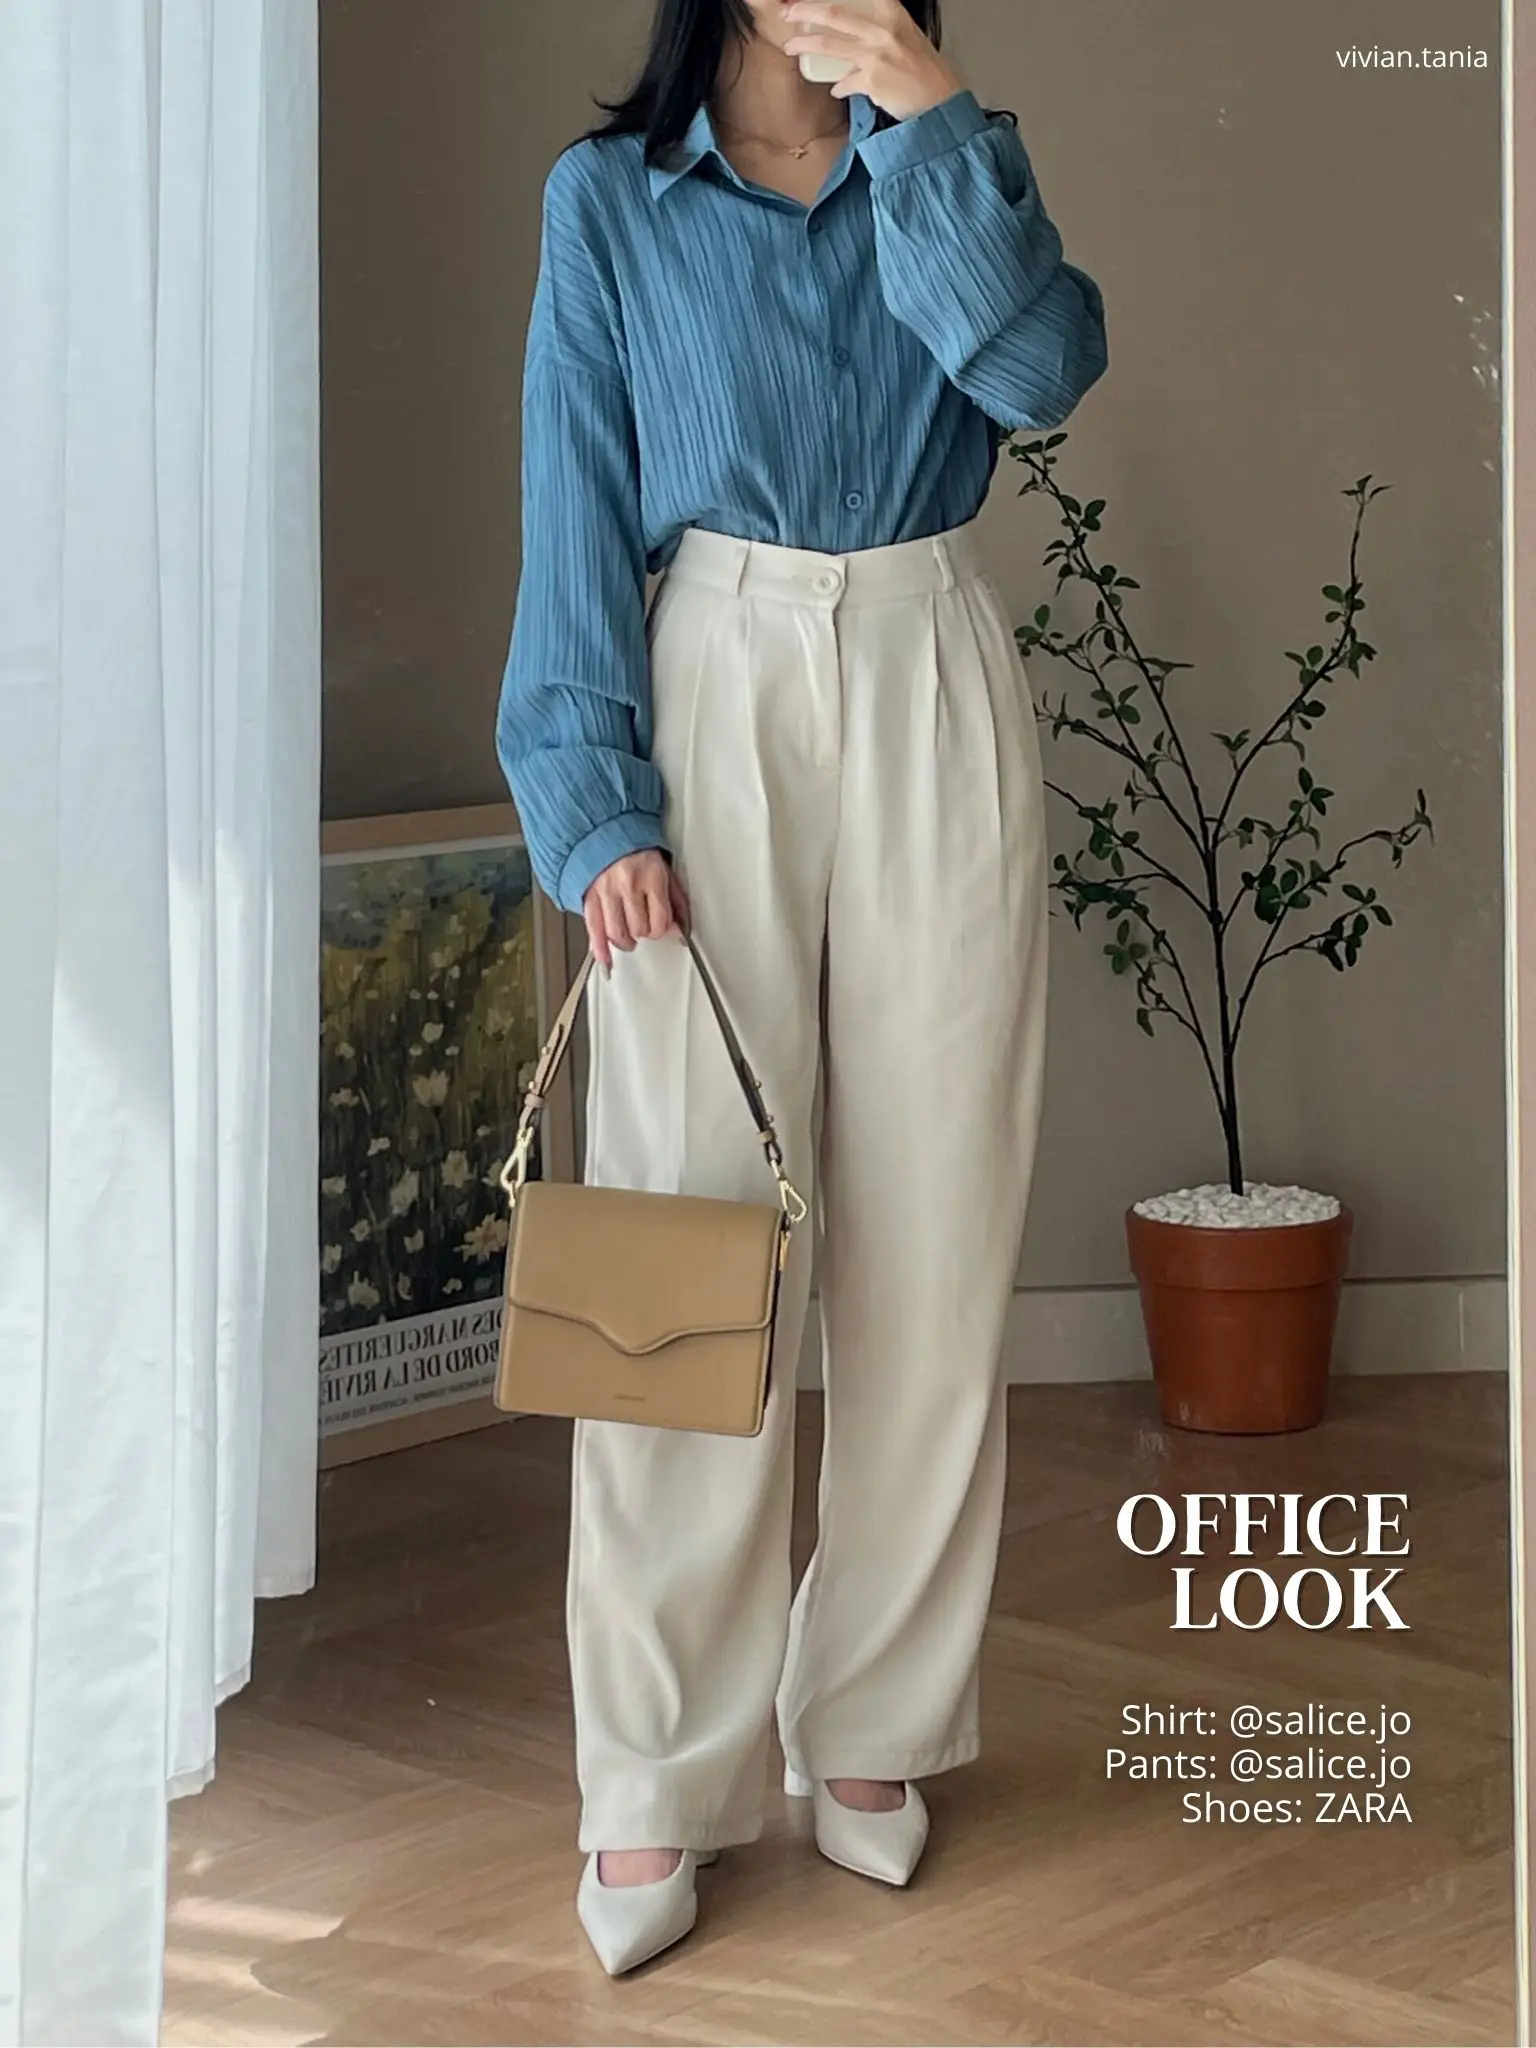 Louis Vuitton trousers with a luxurious and distinctive design - MADELYN